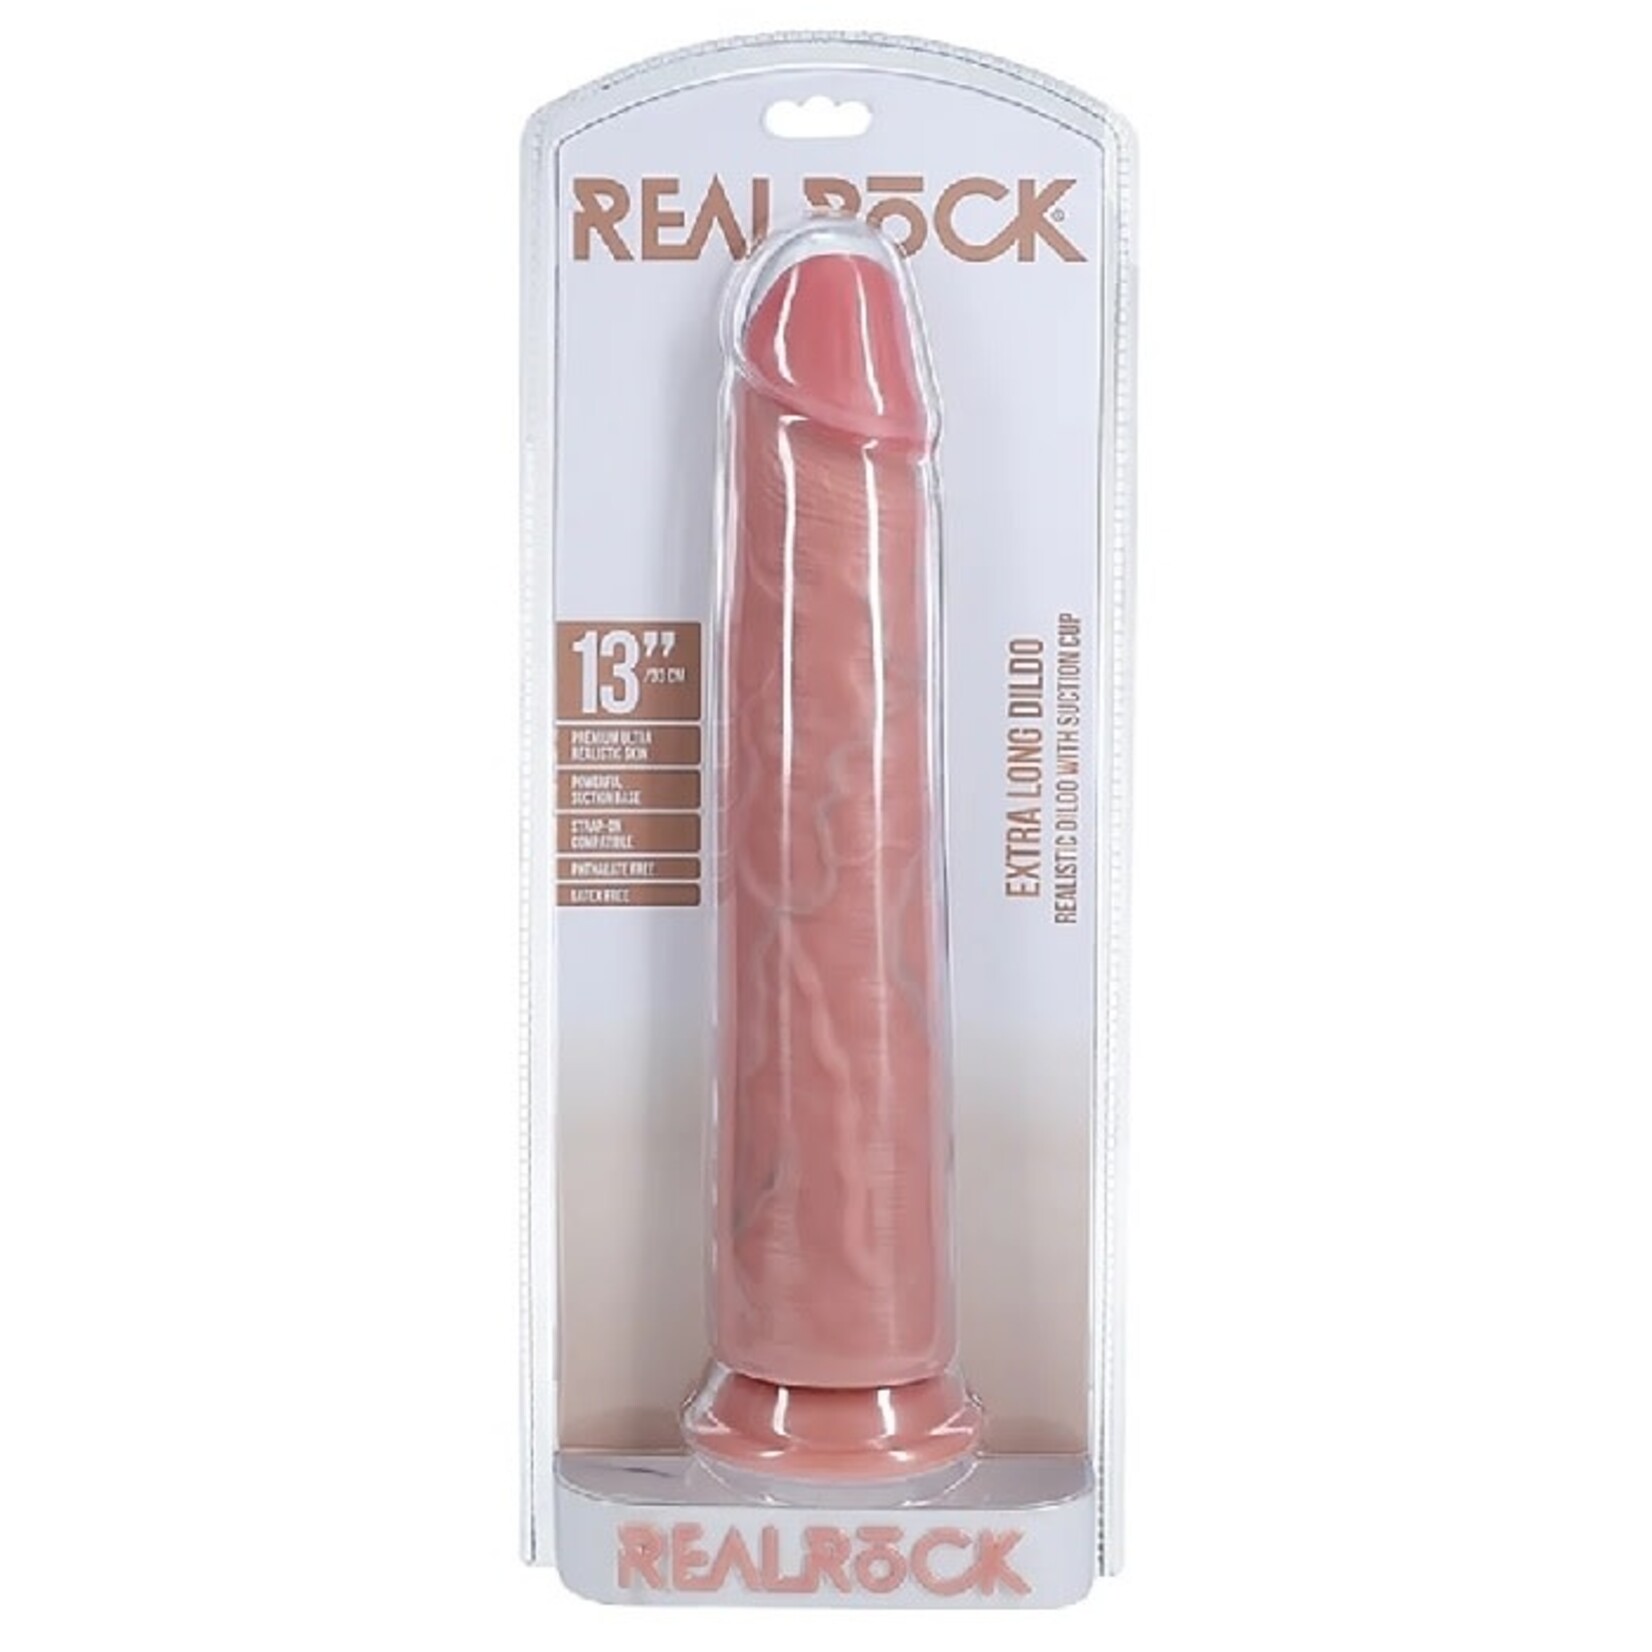 REAL ROCK 13 INCH EXTRA LONG DILDO IN LIGHT